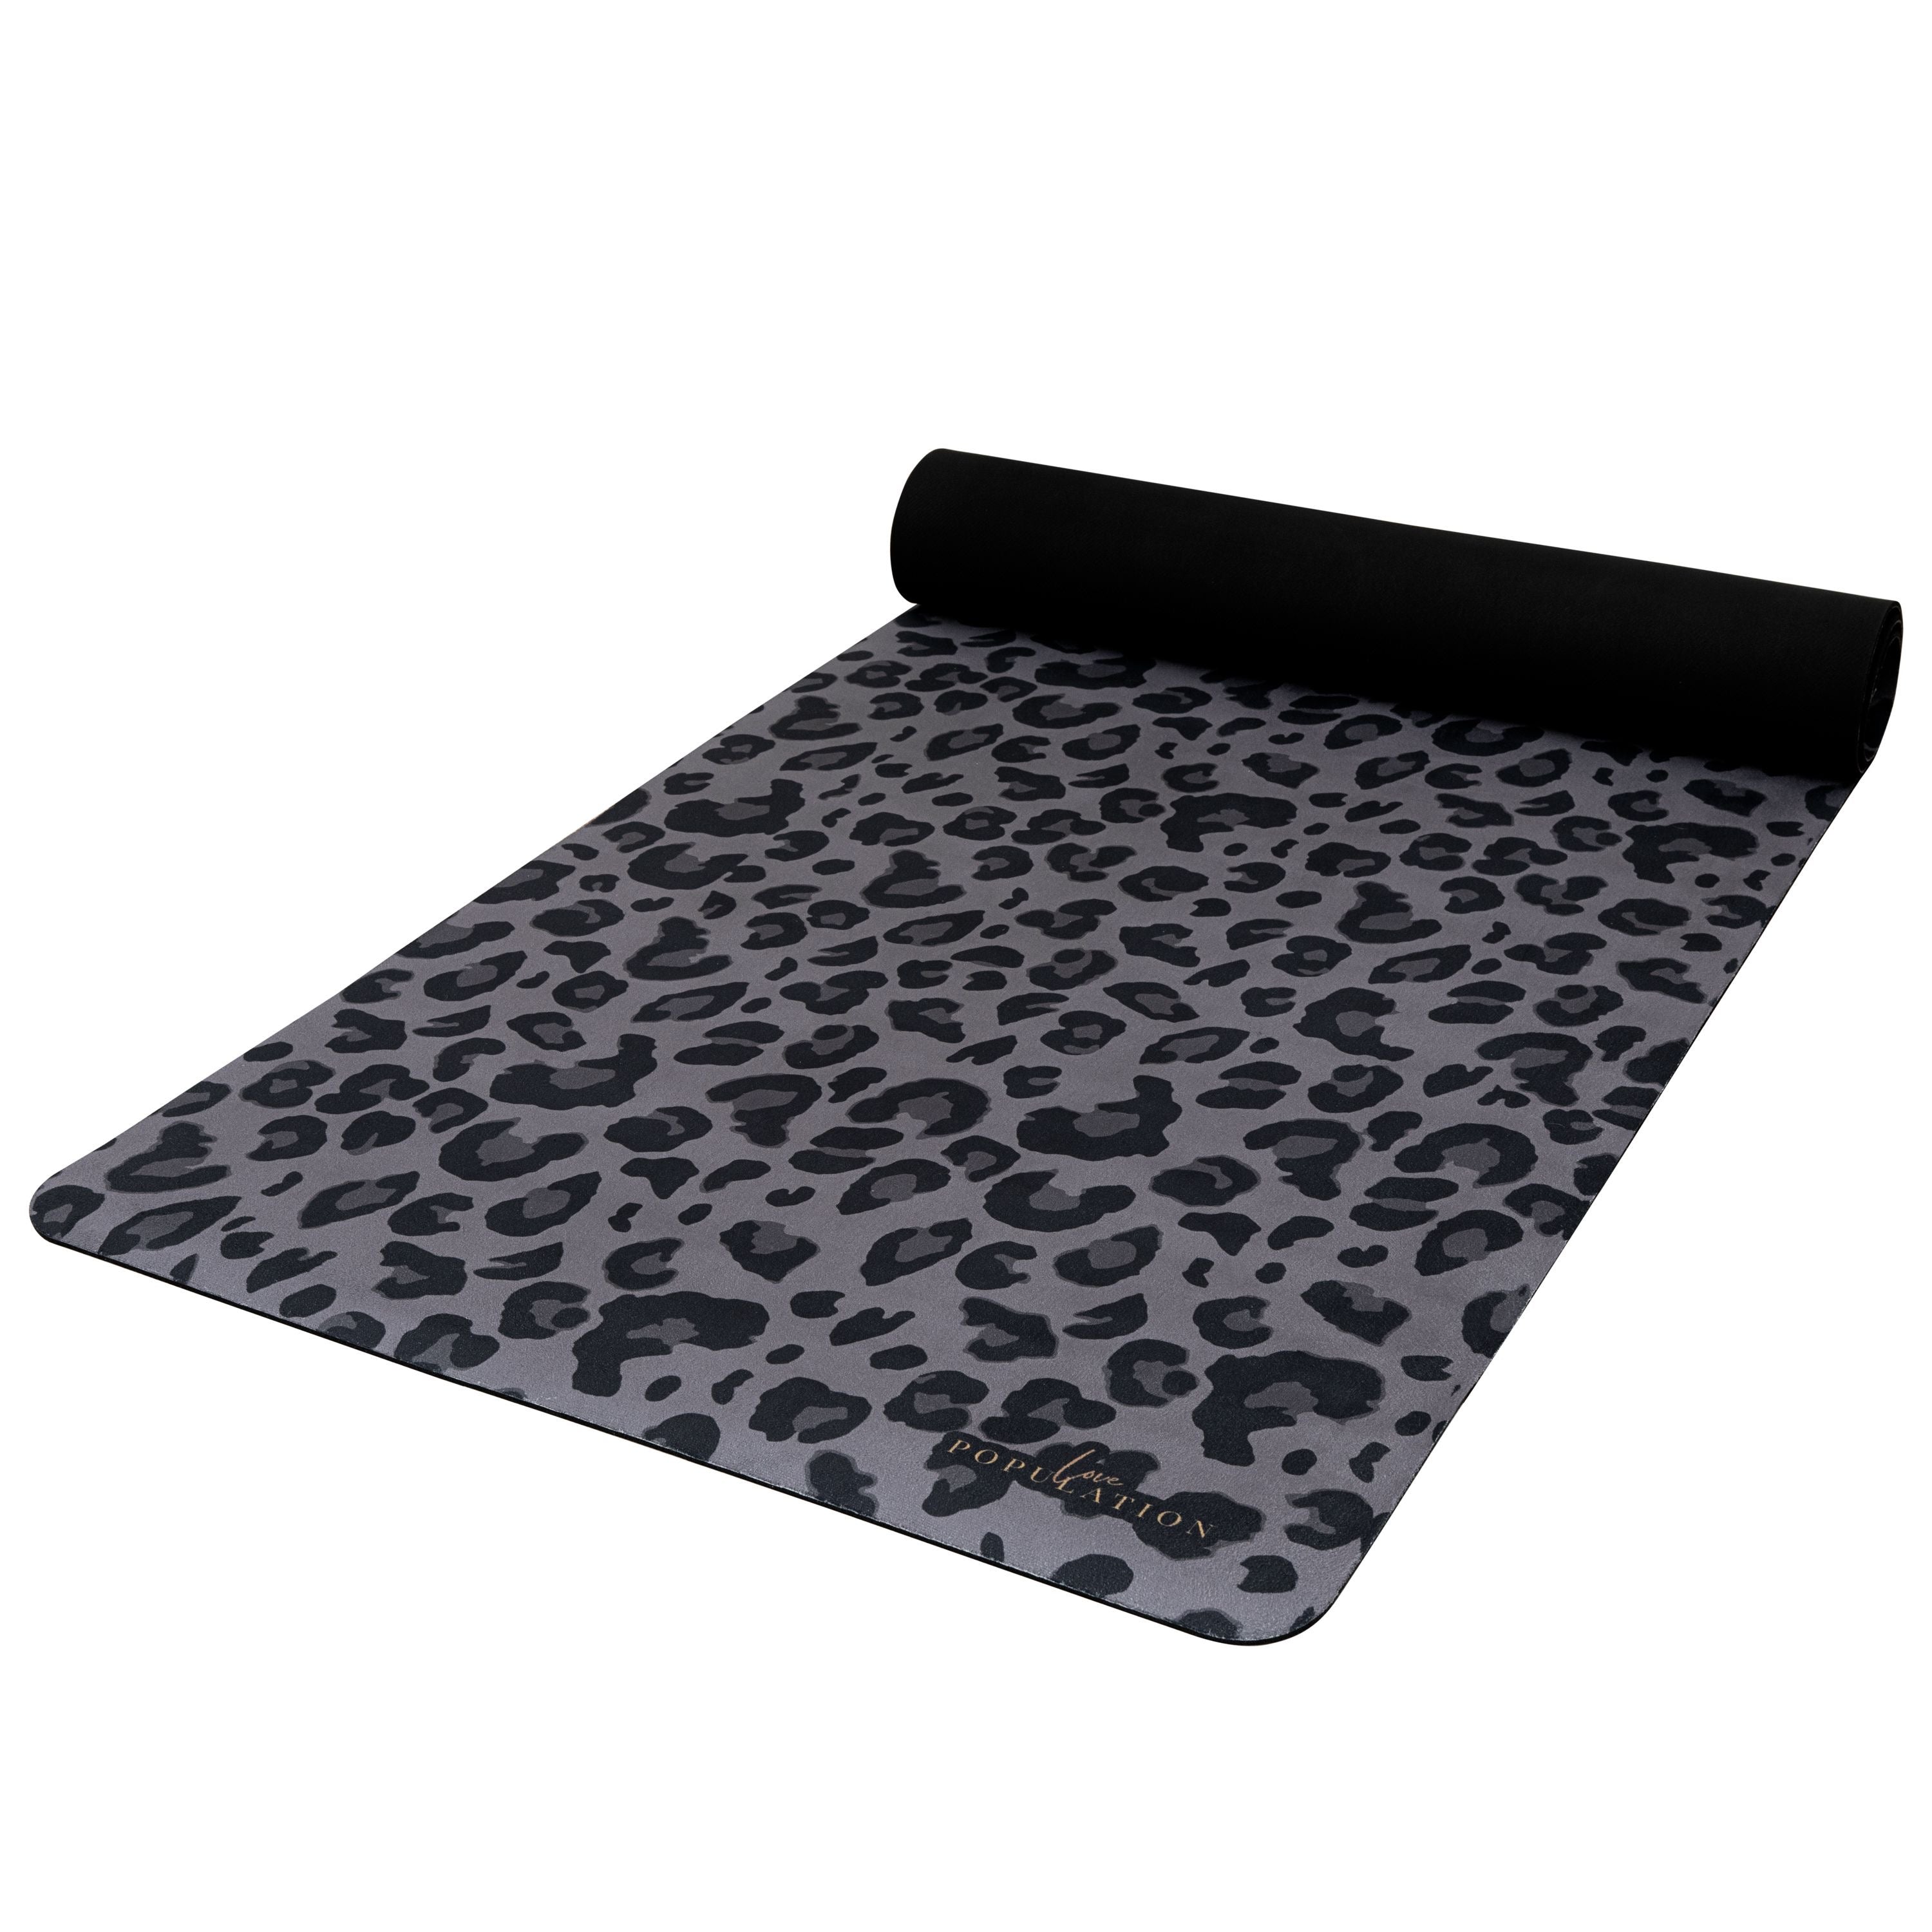 Stylish Yoga Mat With Exotic Print Gray Leopard – LOVE POPULATION